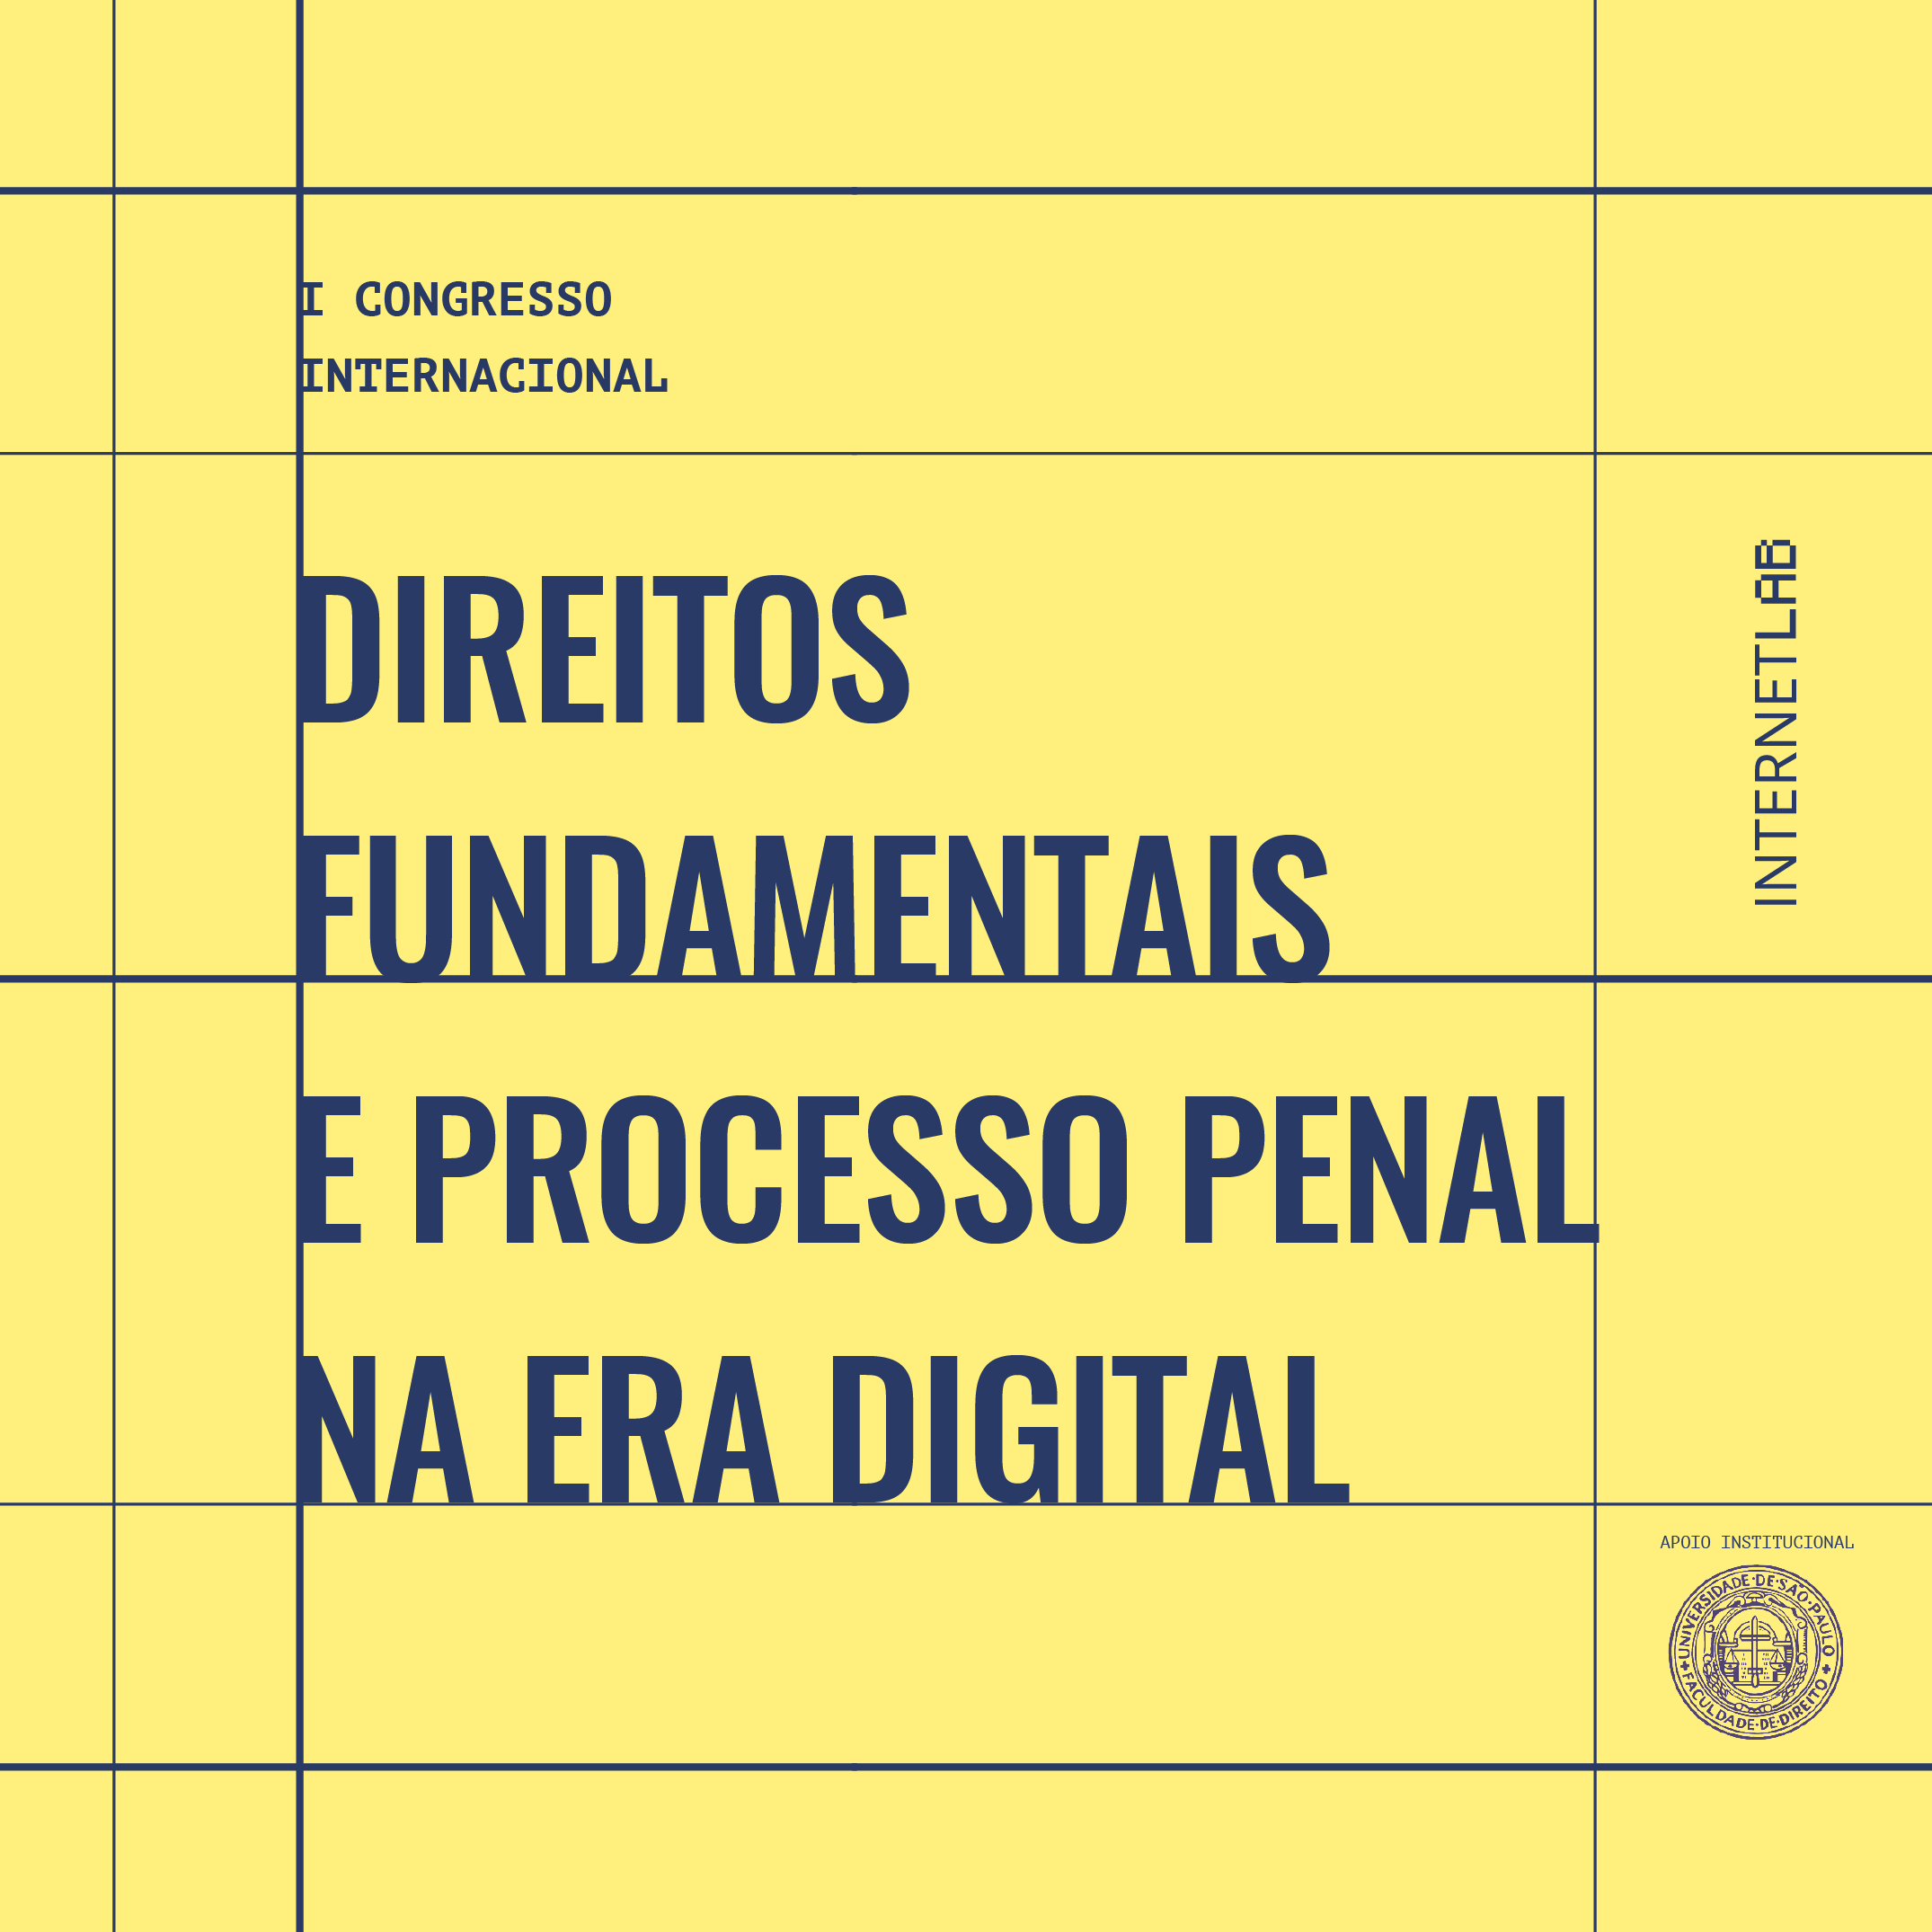 Image of the project, with a light yellow background, interspersed with navy blue lines and the title in the center "I Congresso Internacional Direitos Fundamentais e Processo Penal na Era Digital" and the logos of InternetLab and the Faculdade de Direito da Universidade de São Paulo (FDUSP) in the right corner of the image.